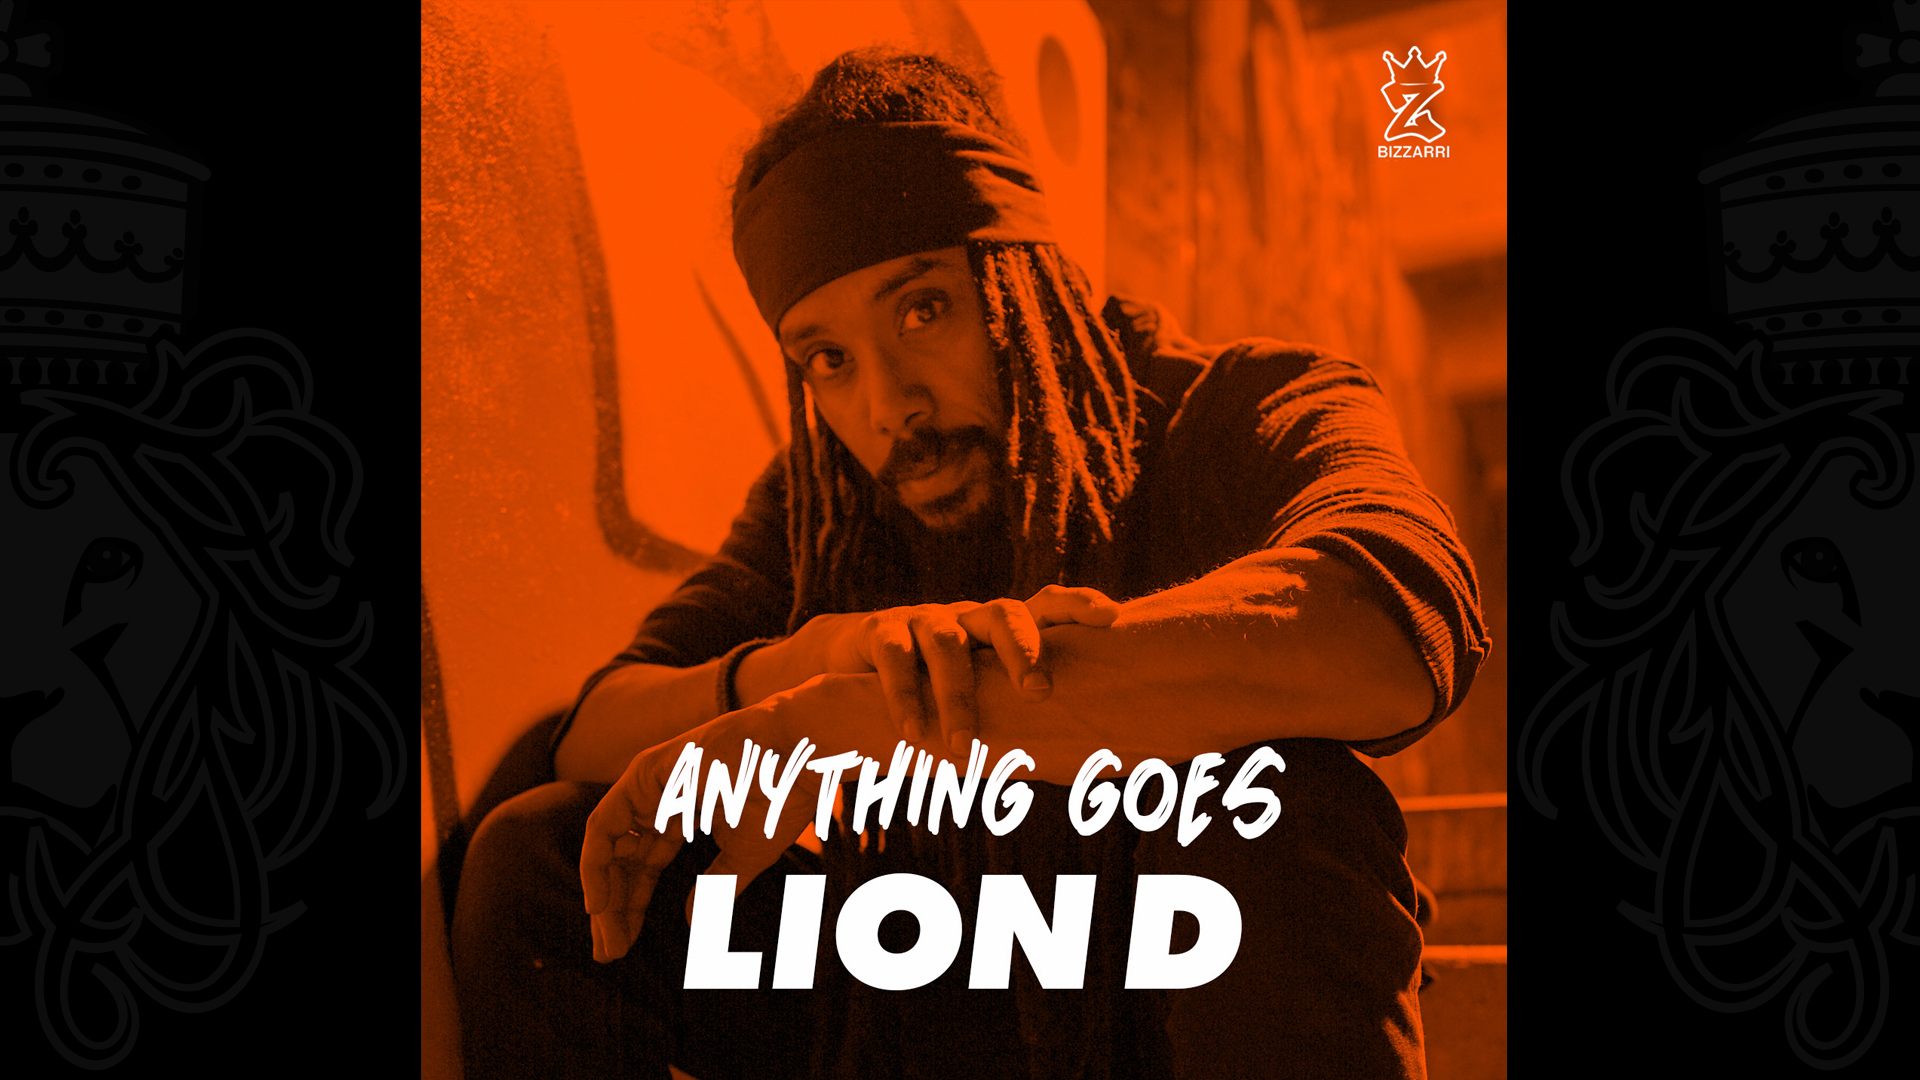 Lion D - Anything Goes